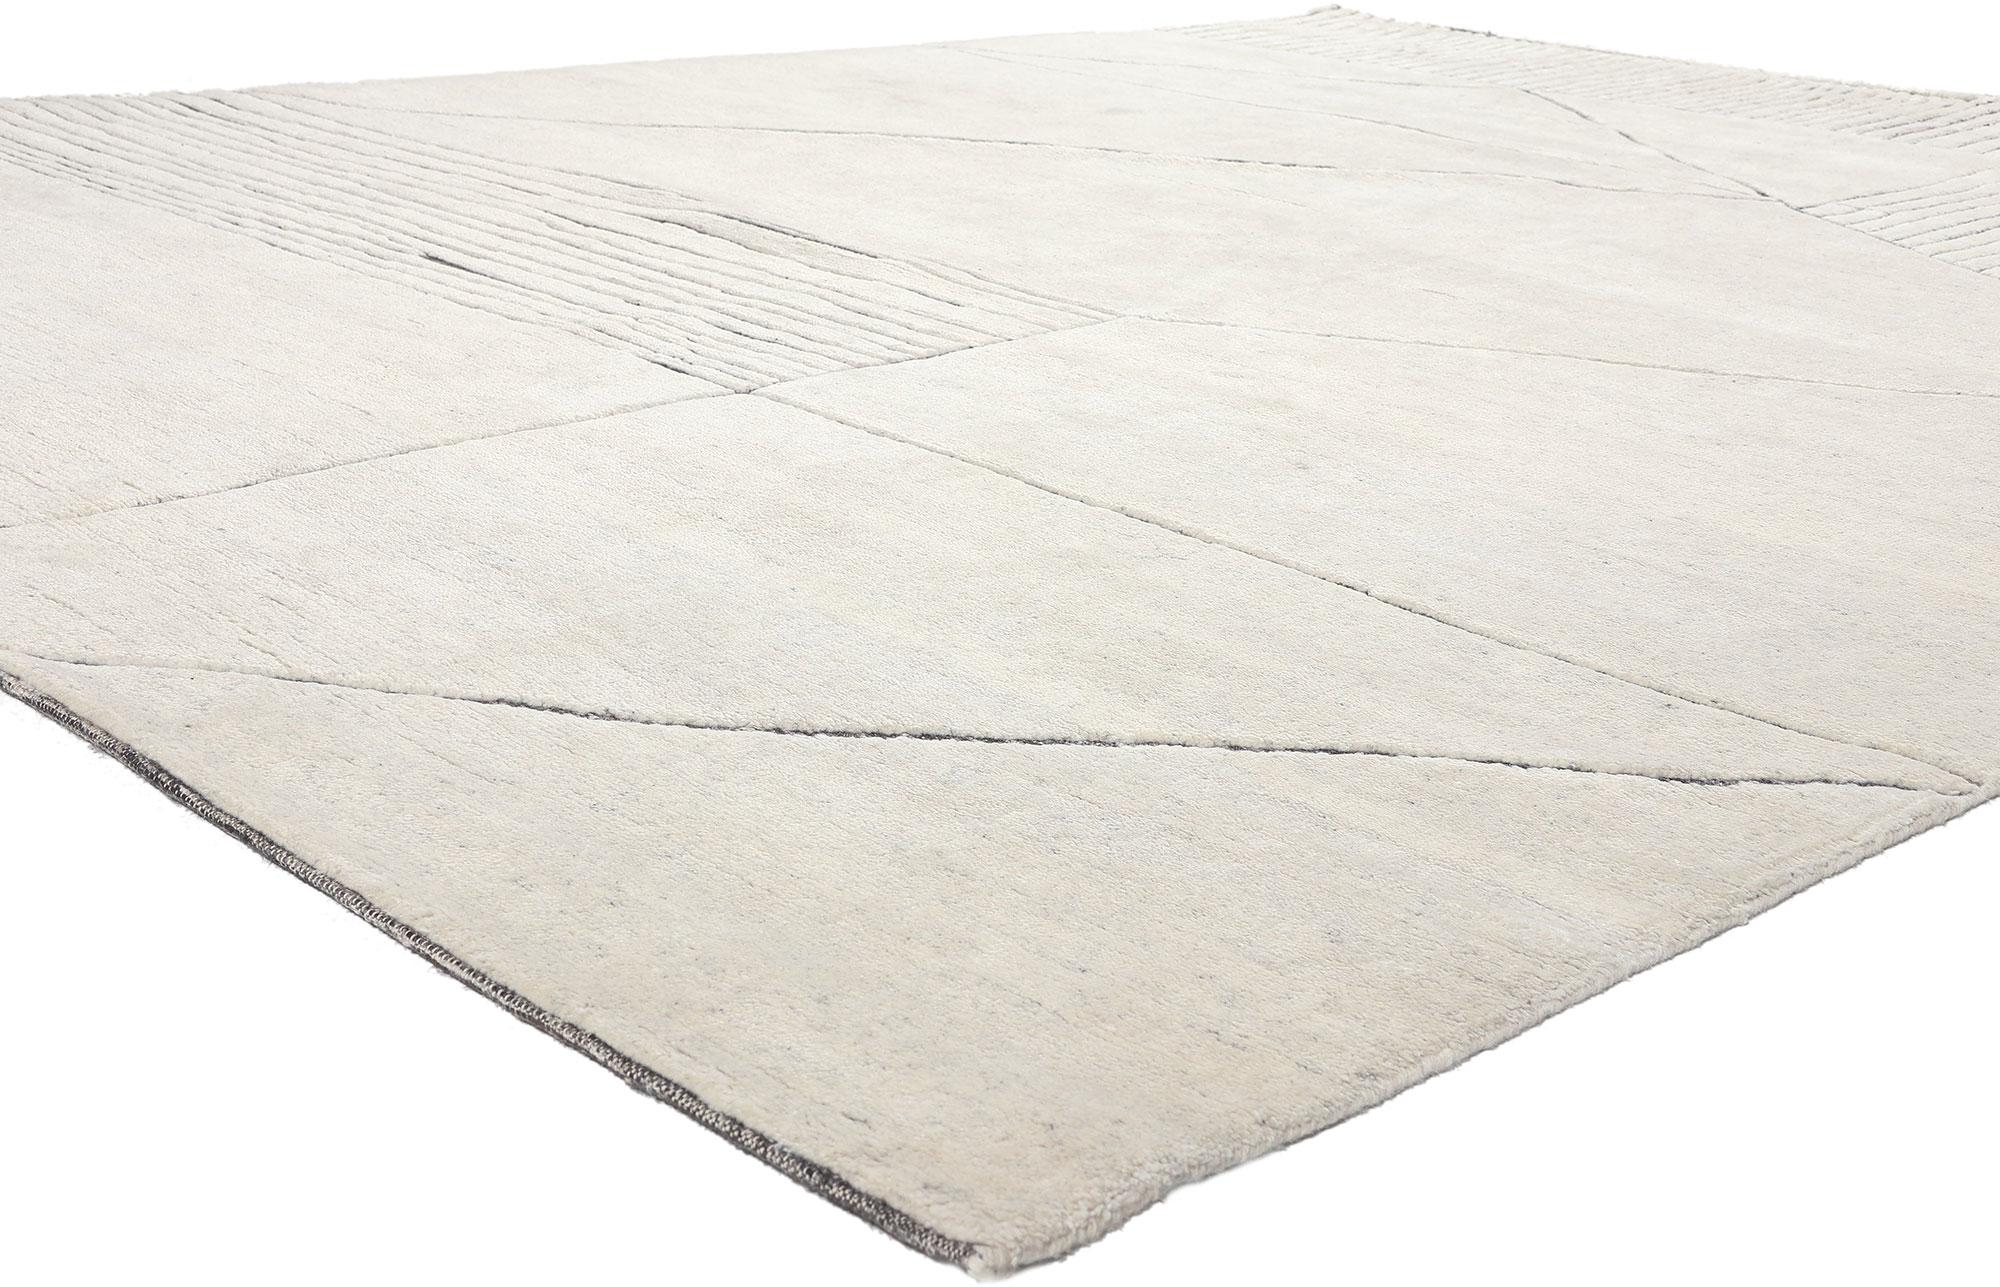 30983 Minimalist Abstract Moroccan Rug, 09'00 x 11'10.
Deconstructivism meets minimalist abstract in this hand knotted wool Moroccan style rug. The conceptual design elements and neutral colors woven into this piece work together creating a modern